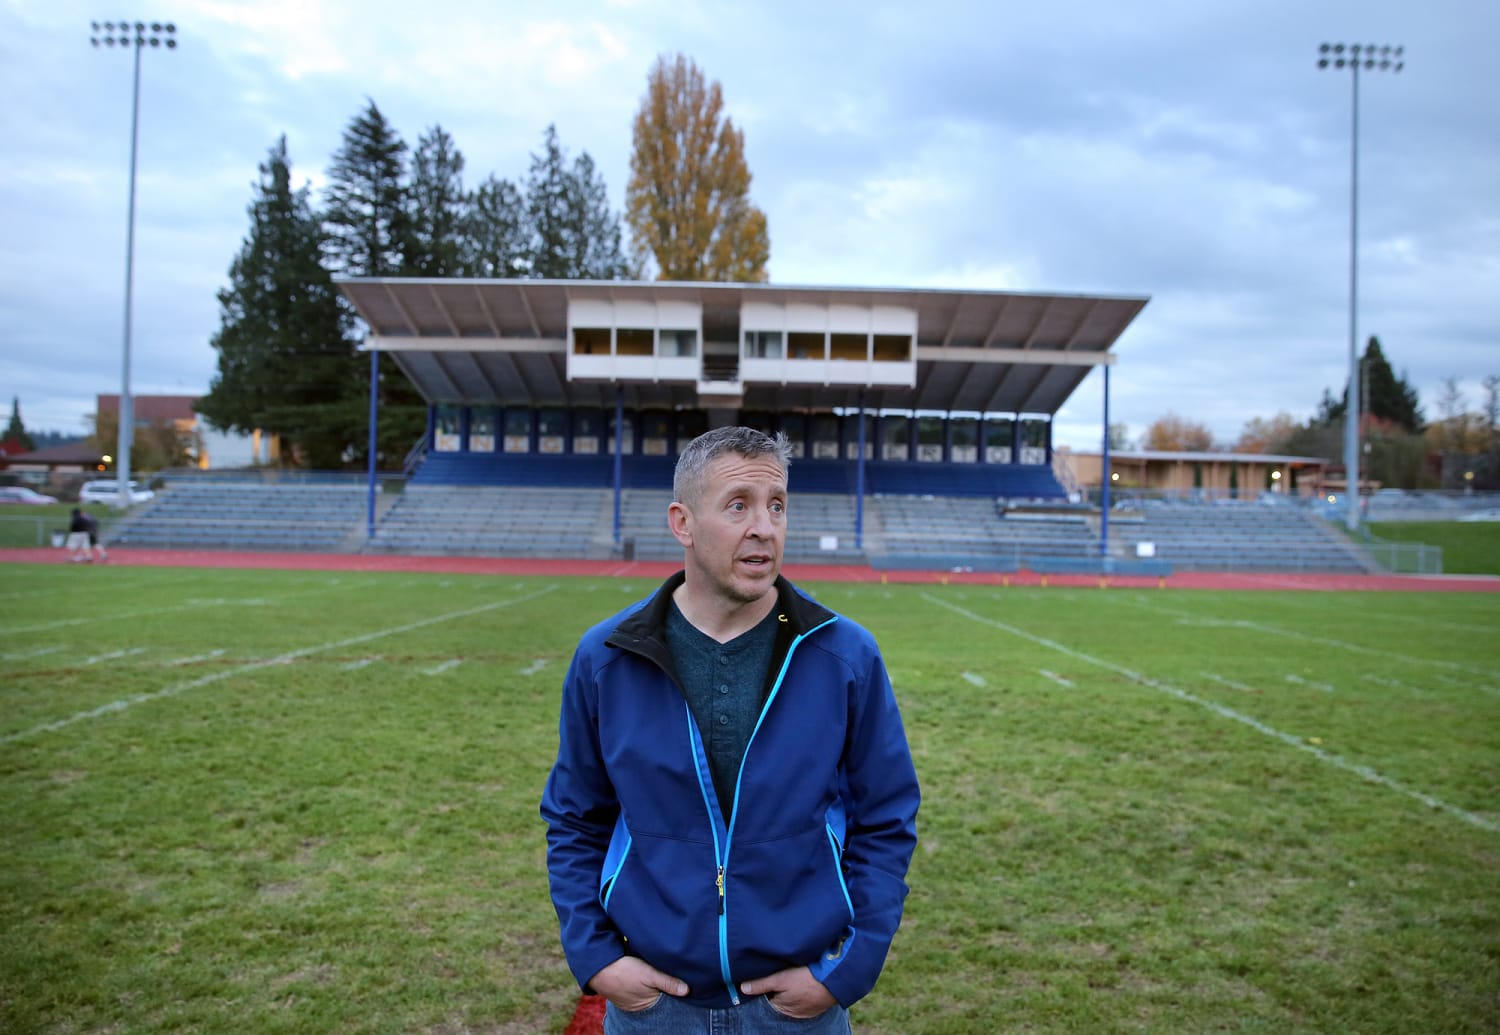 Supreme Court won't hear case of HS football coach fired for on-field prayer